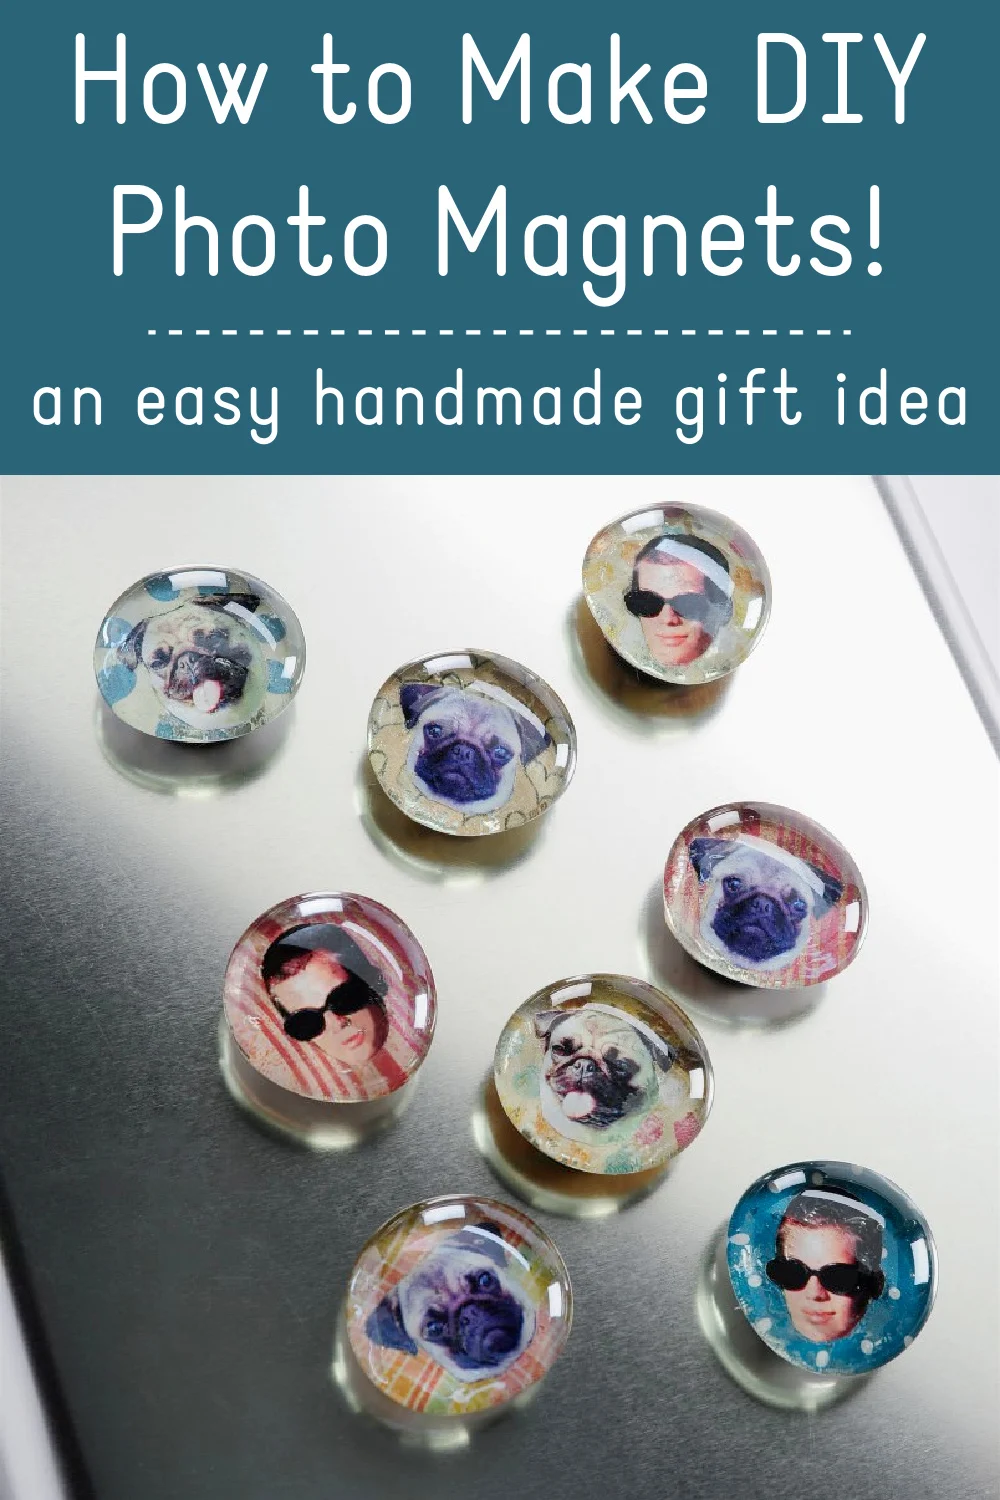 Easiest craft ever! Get some pics, some magnets, cardboard & mod